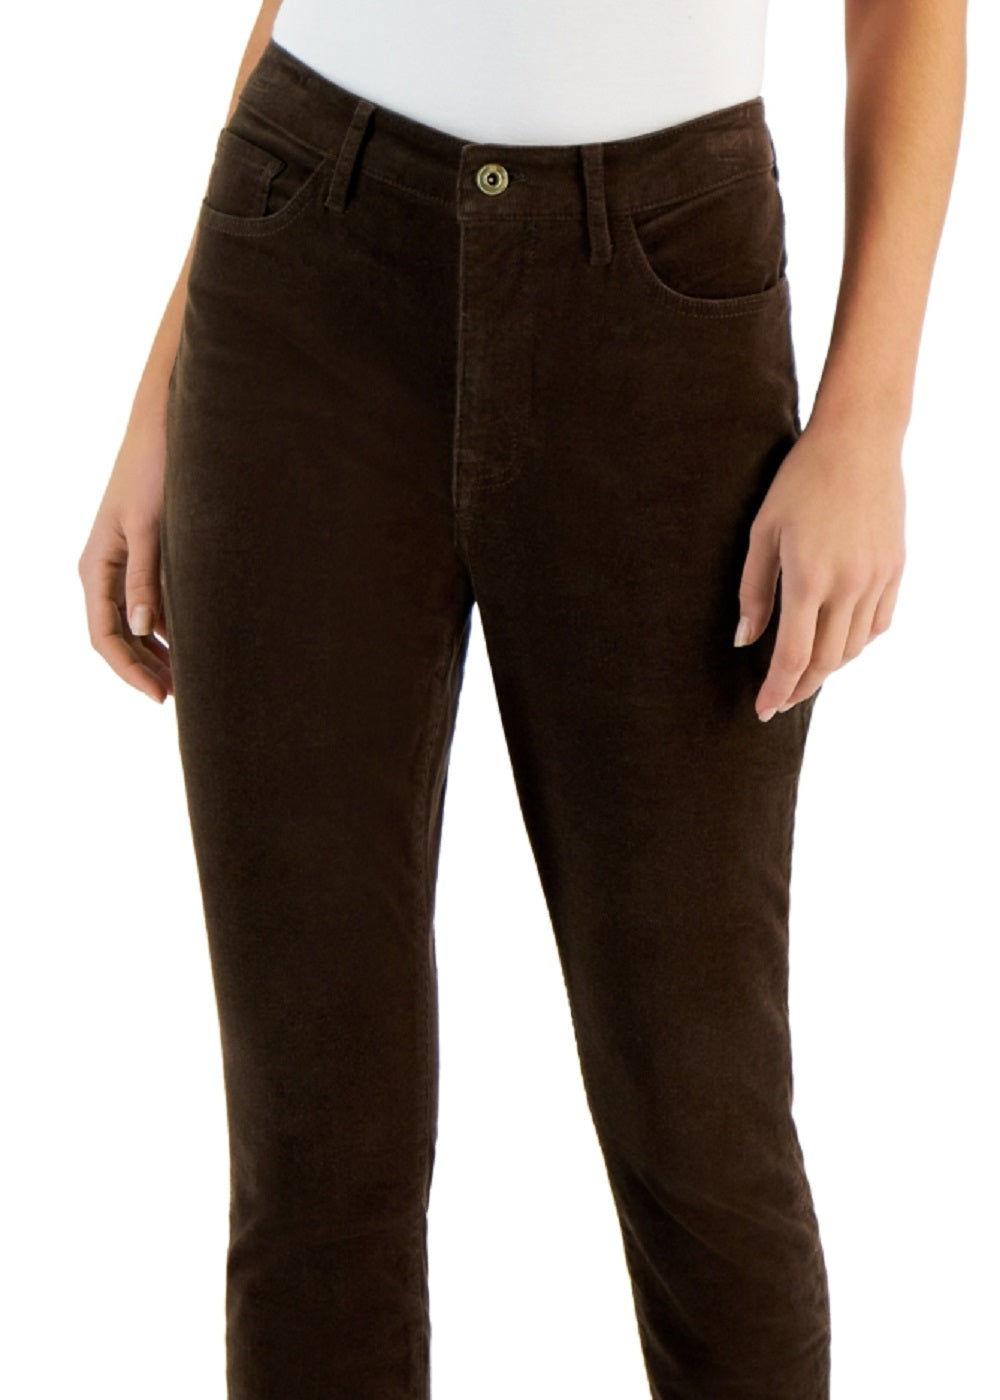 Tommy Hilfiger Women's Corduroy Skinny Ankle Pants Brown Size 16